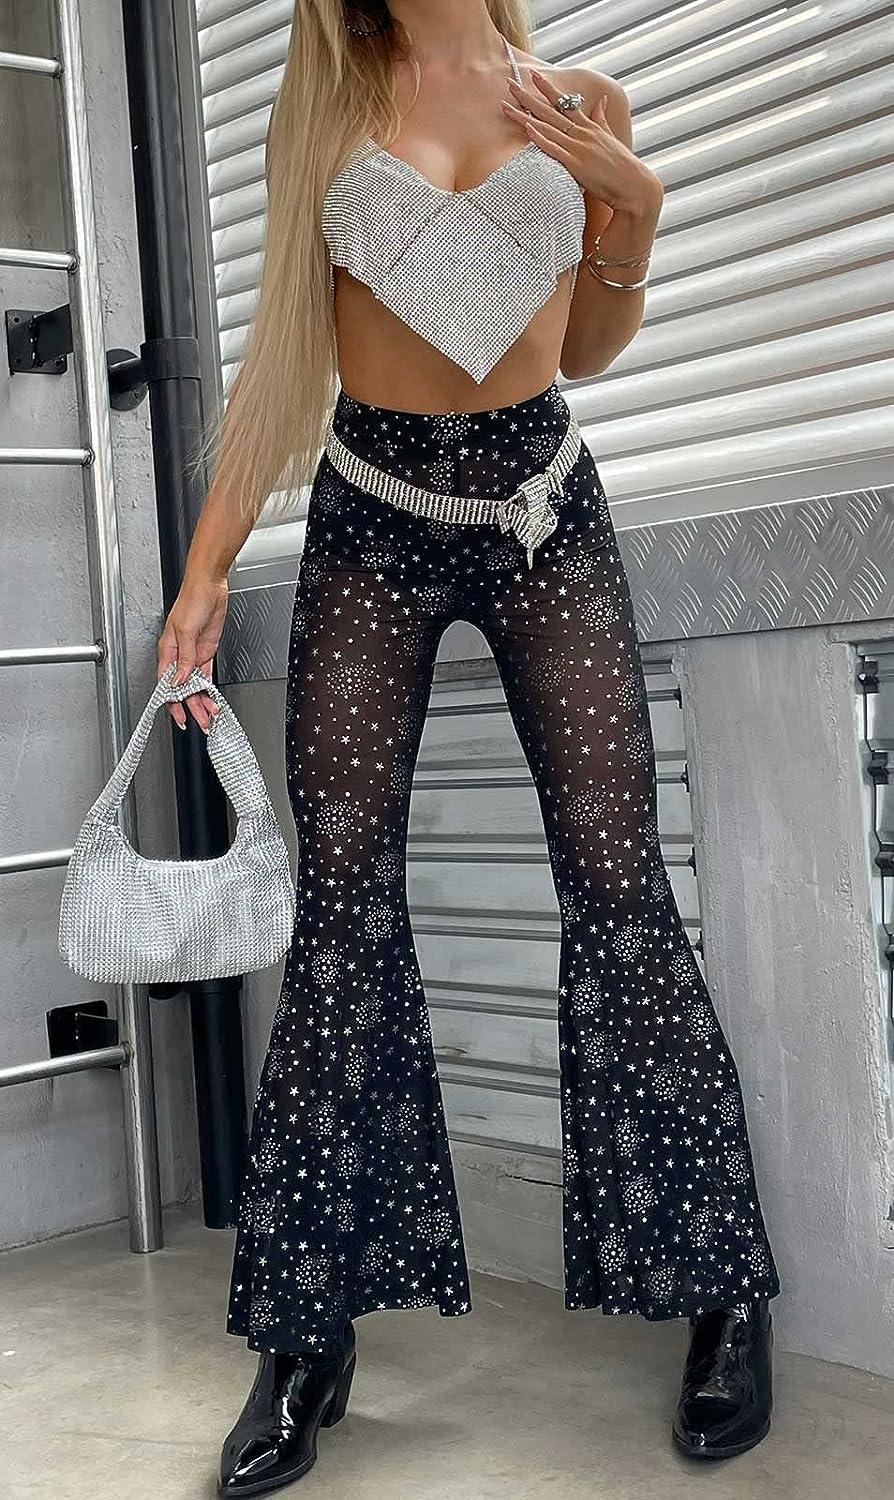  2022 Sequin Mesh Pants Glitter Sparkle Rave Pants High Waist  Sheer Euphoria Outfit for Women Dance Festival Clubwear : Clothing, Shoes 